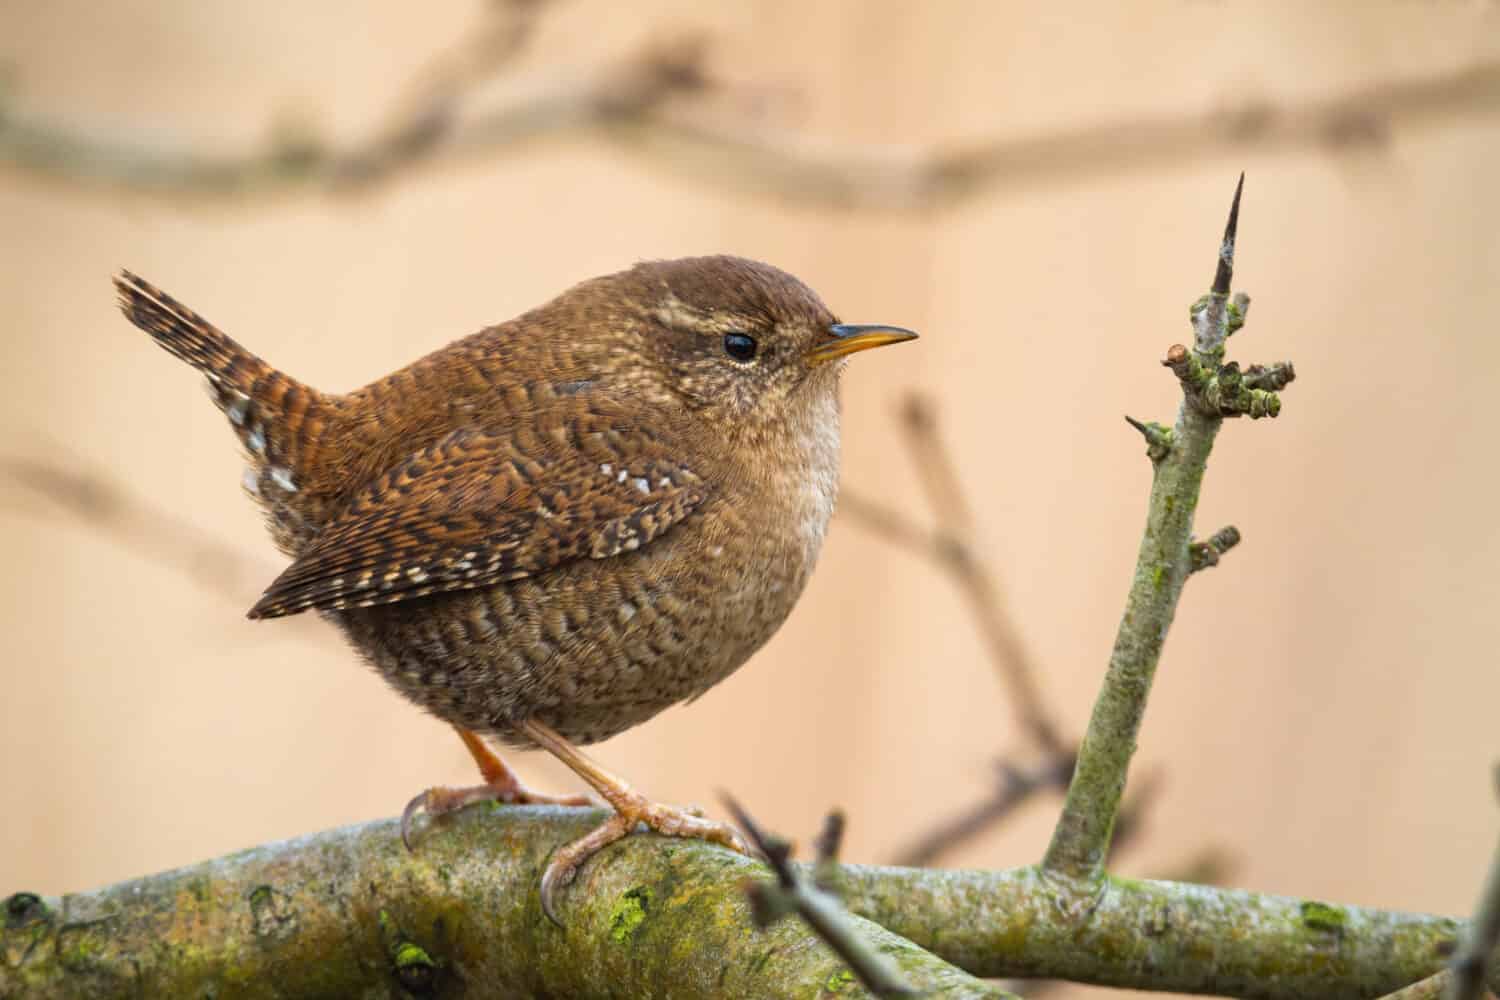 Adorable eurasian wren, troglodytes troglodyte, resting on the tree in spring. Tiny european songbird on branch. Little animal looking innocent while sitting with erect tail. Concentrated bird on tree